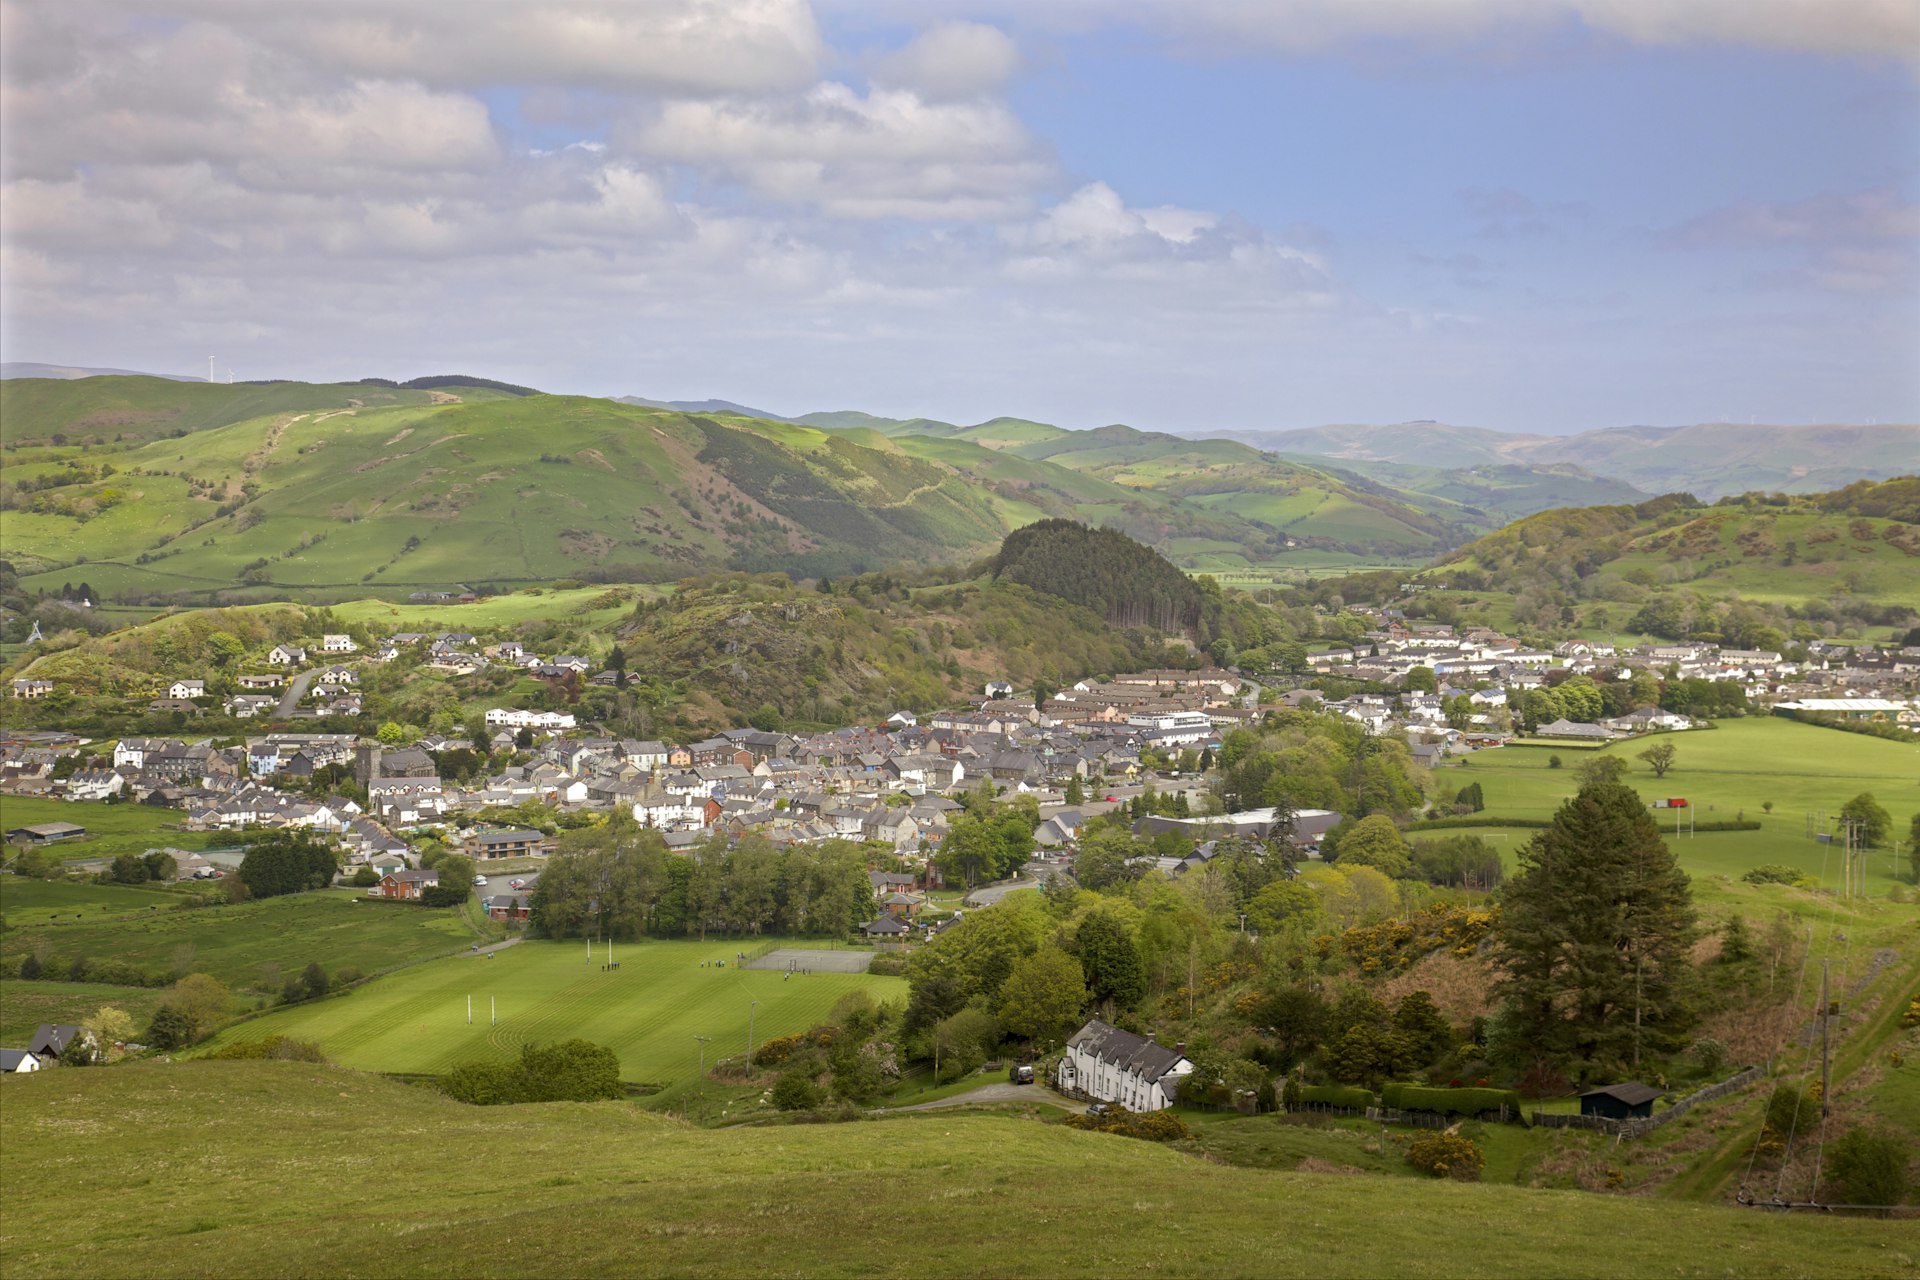 A town surrounded by green rolling hills